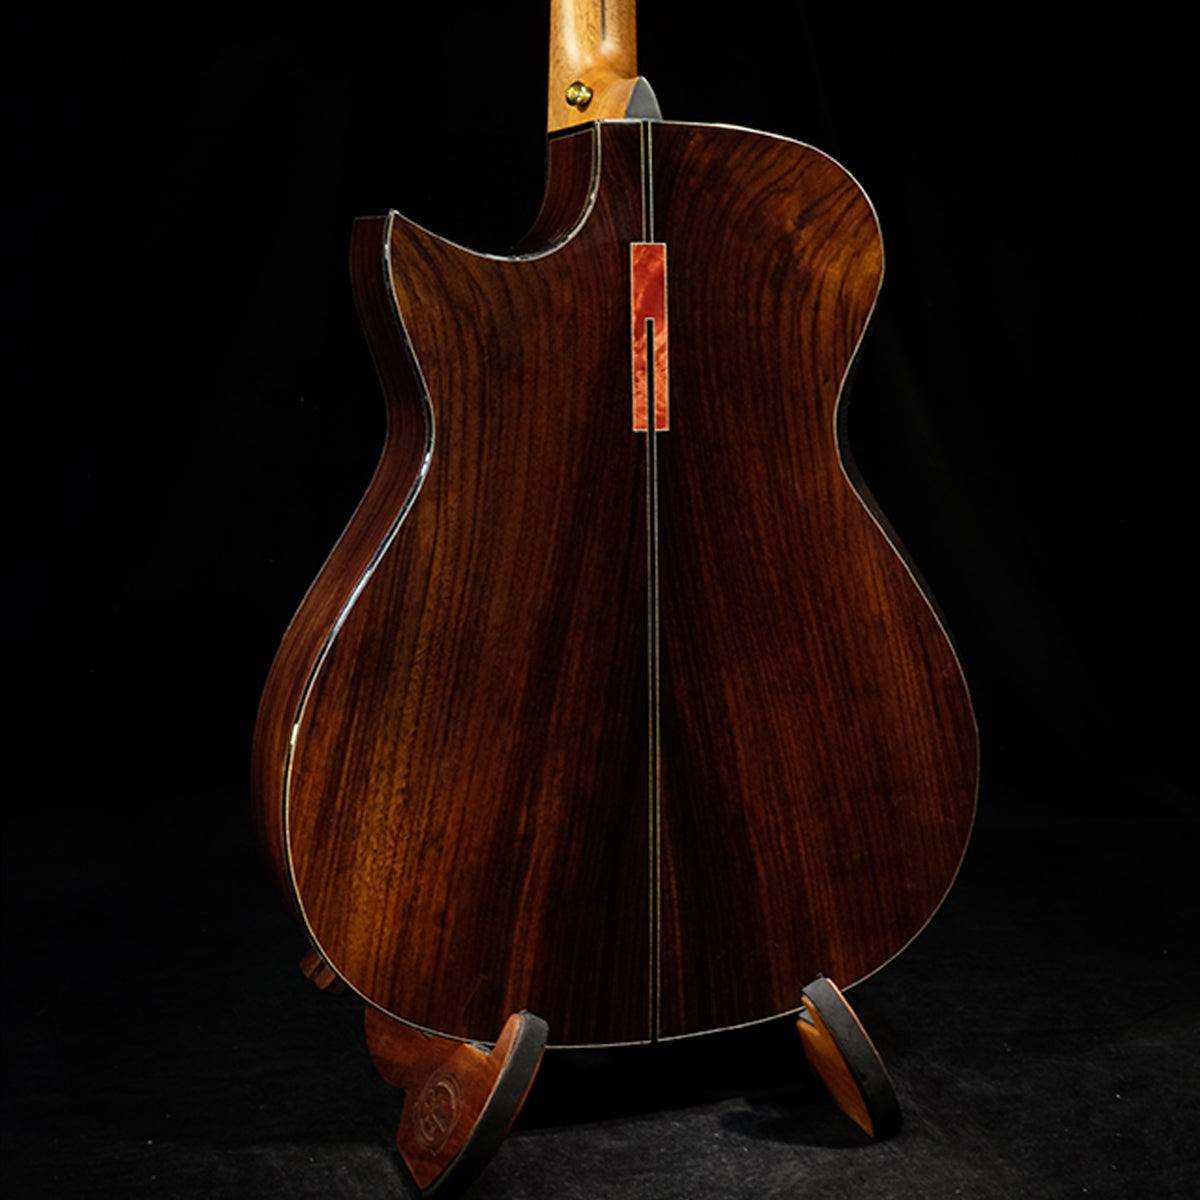 Blue Label OM Sitka Spruce with Indian Rosewood | #96